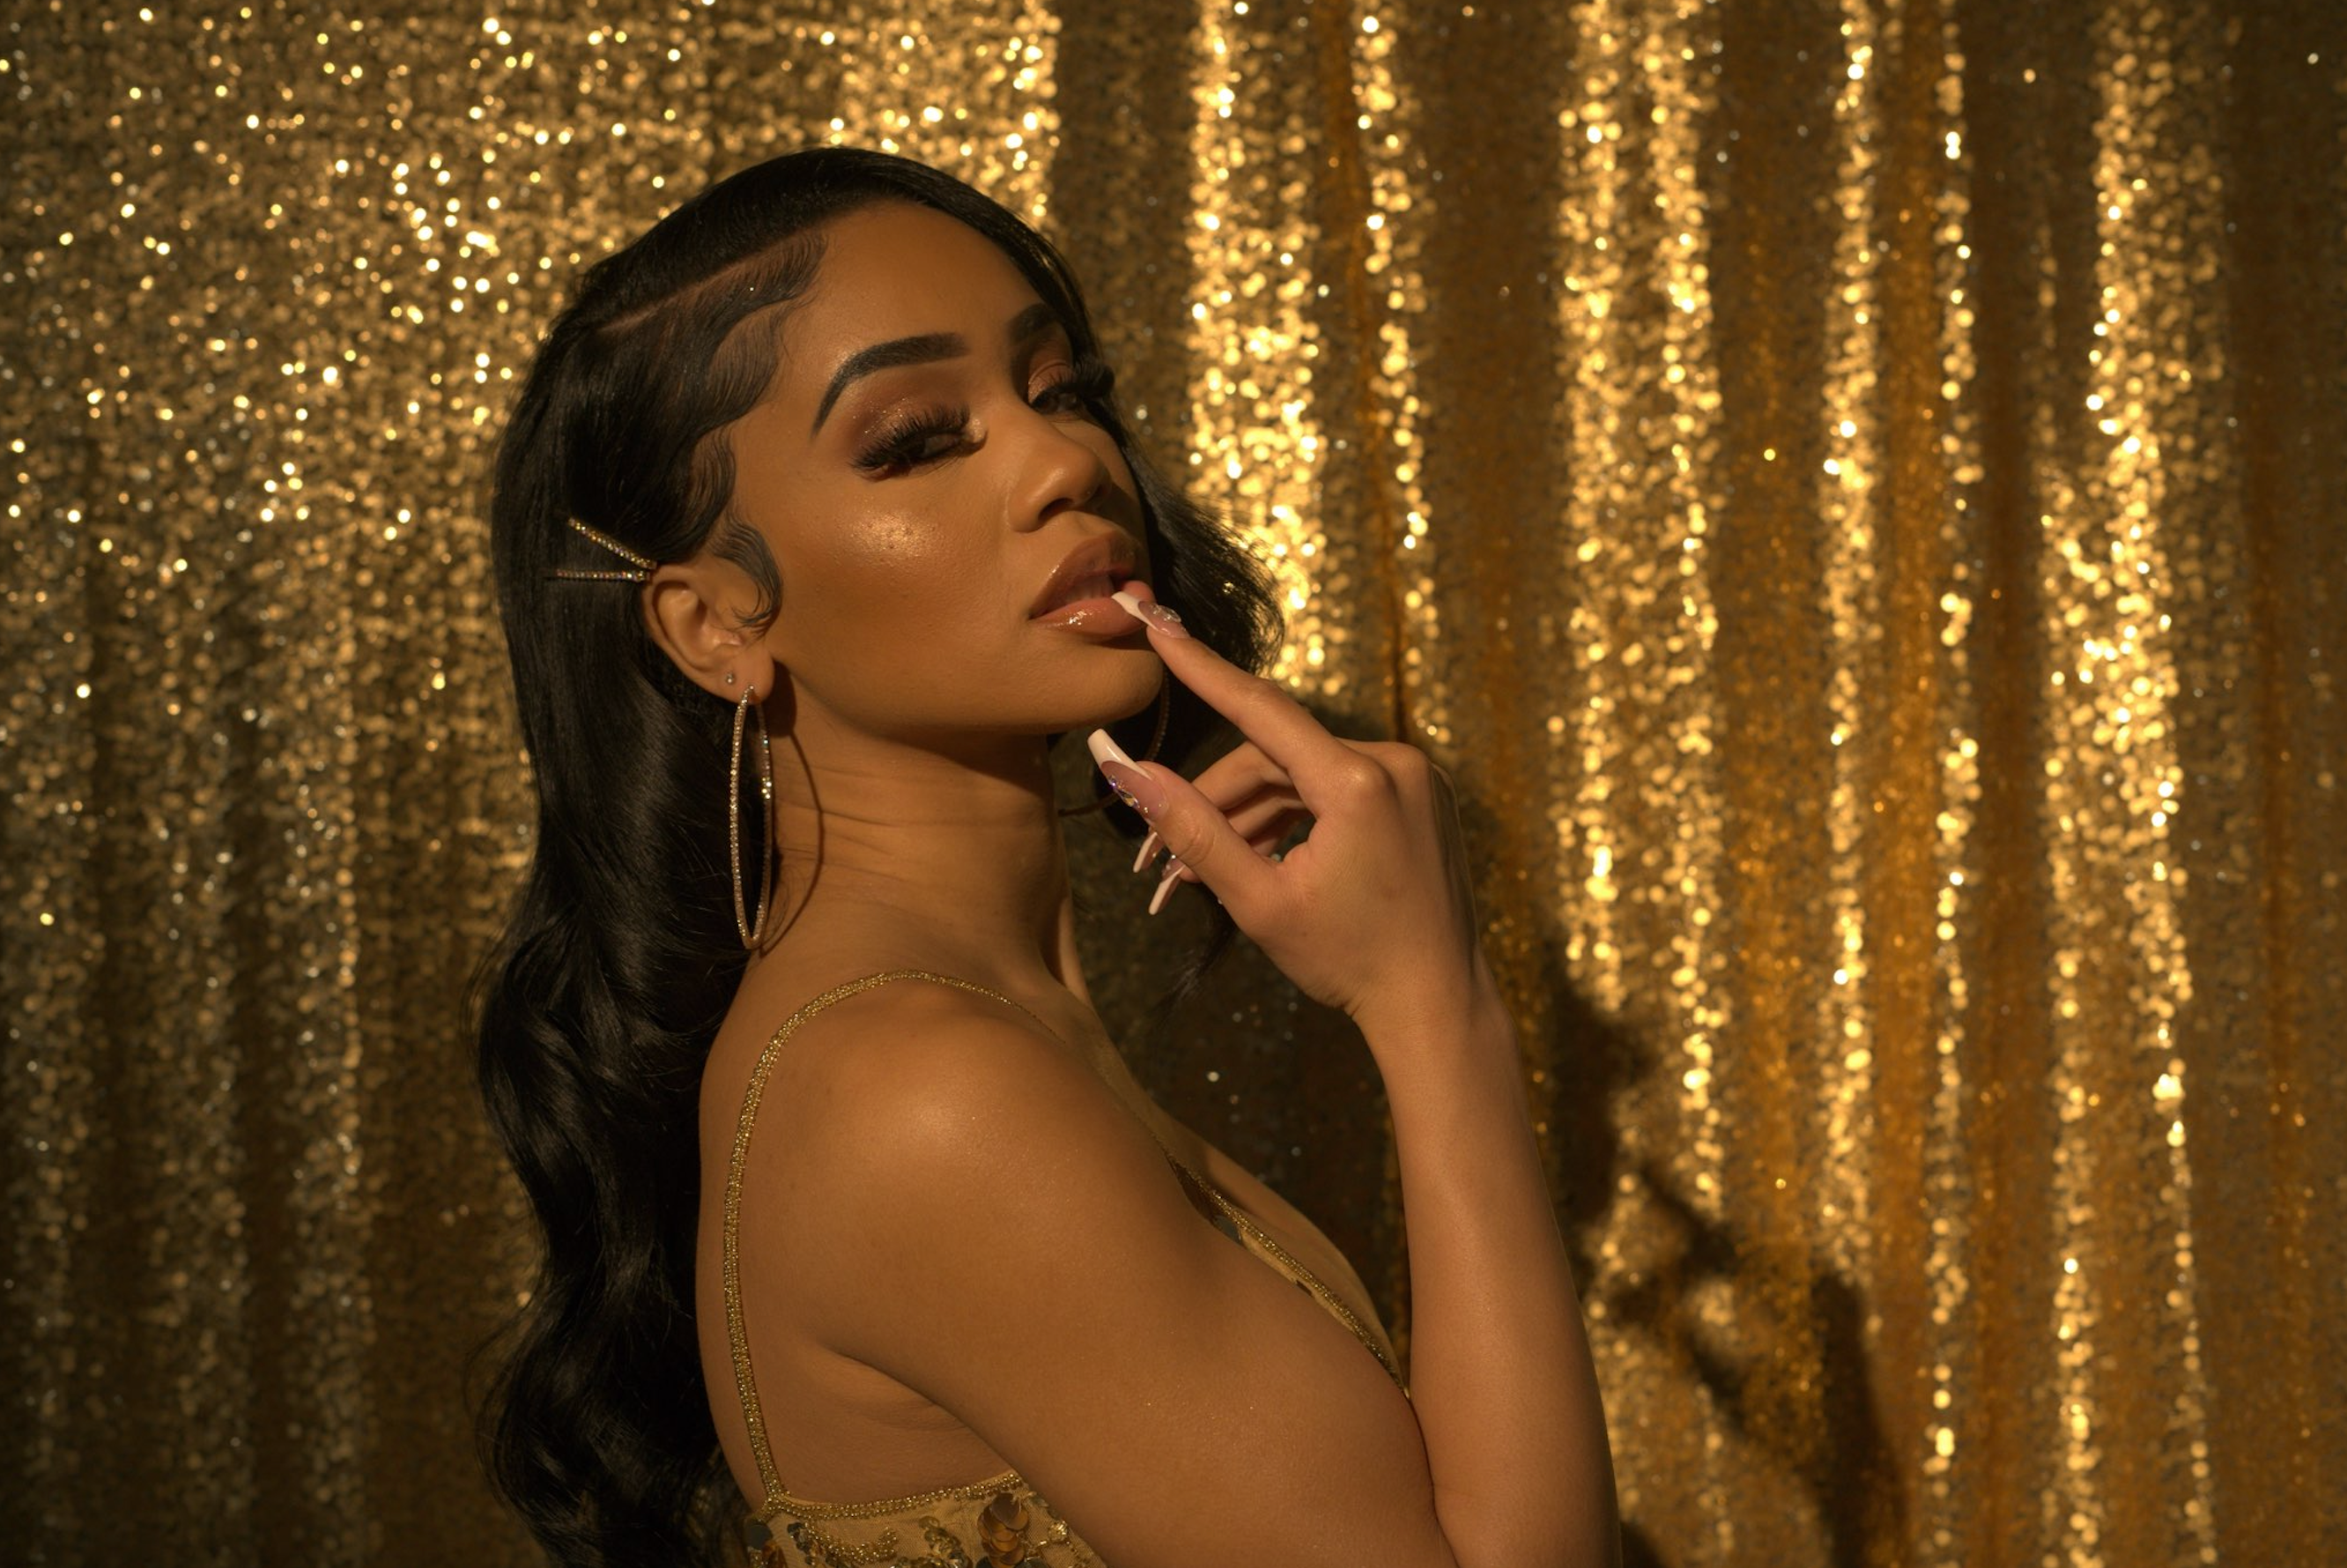 Saweetie Gives Us The Scoop On Her Single, ‘Back to the Streets’